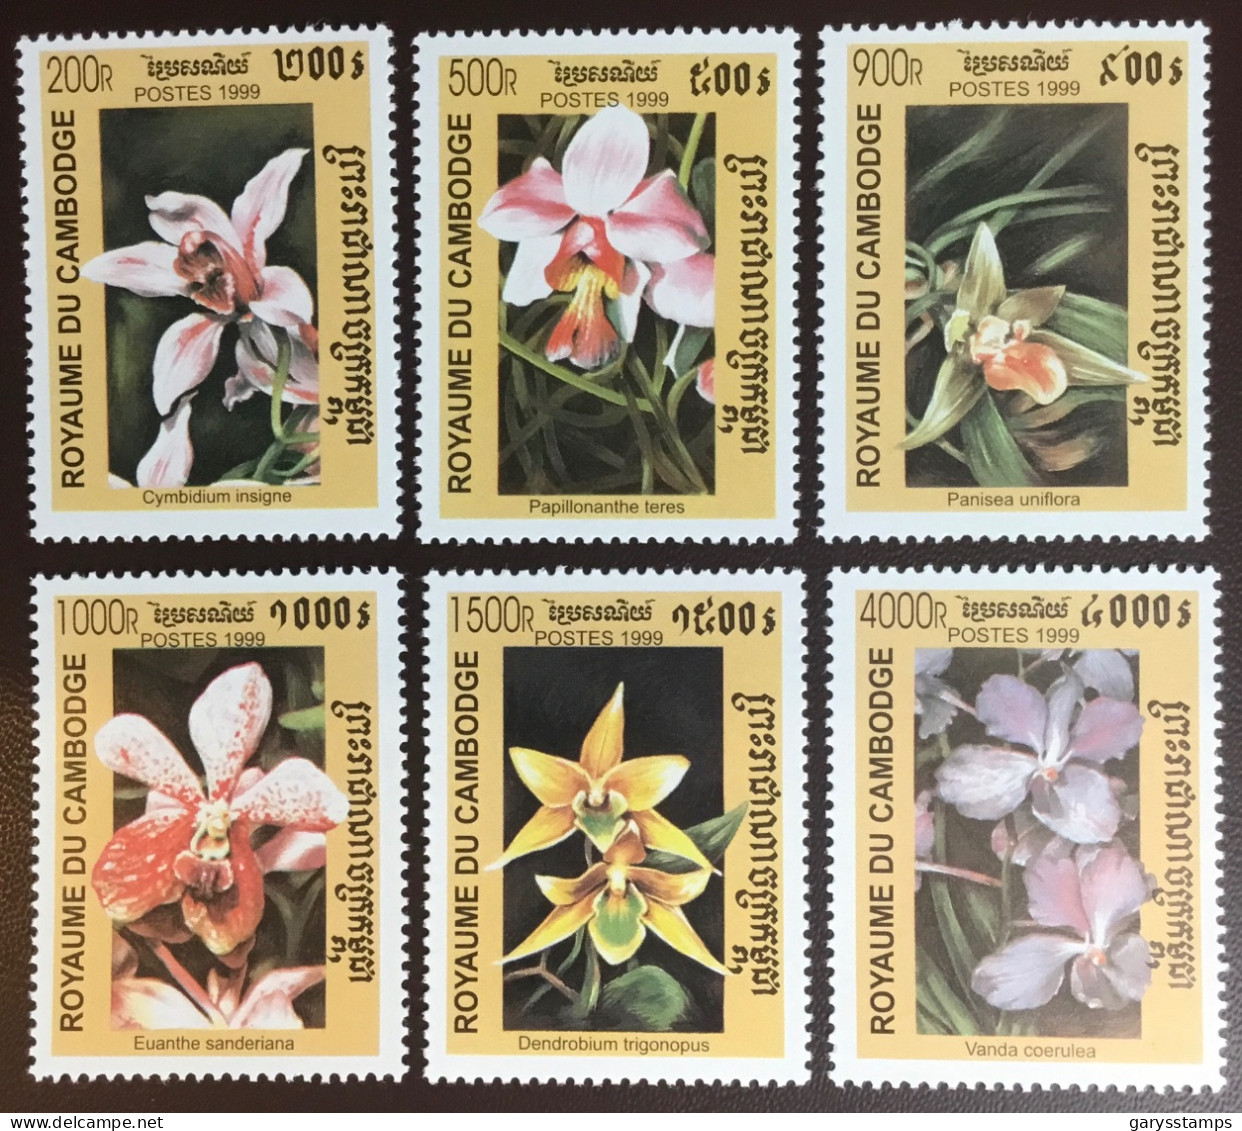 Cambodia 1999 Orchids Flowers MNH - Orchidées